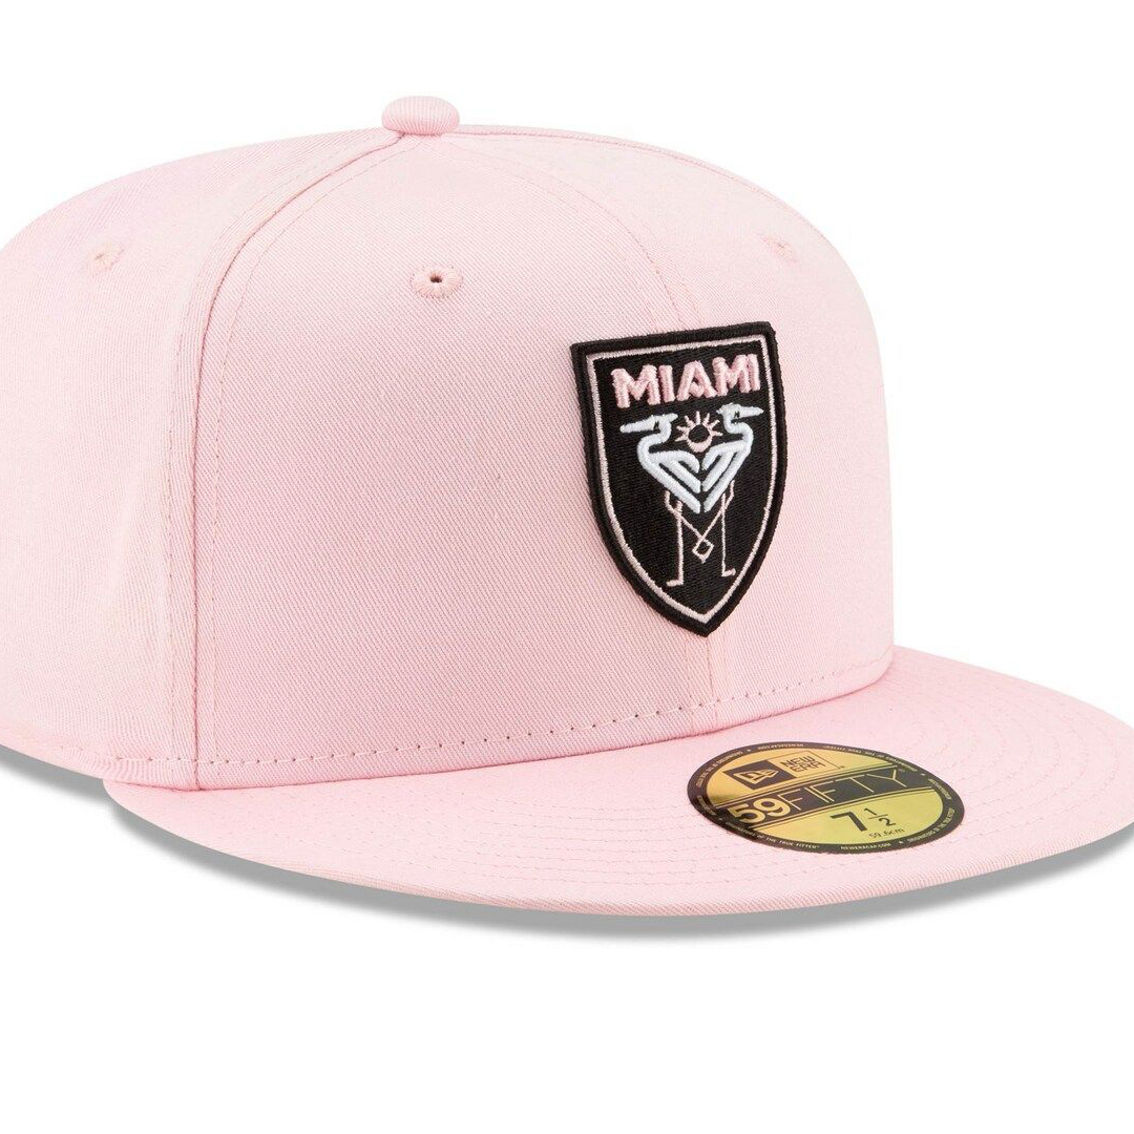 Men's New Era Pink Inter Miami CF Primary Logo 59FIFTY Fitted Hat - Image 4 of 4